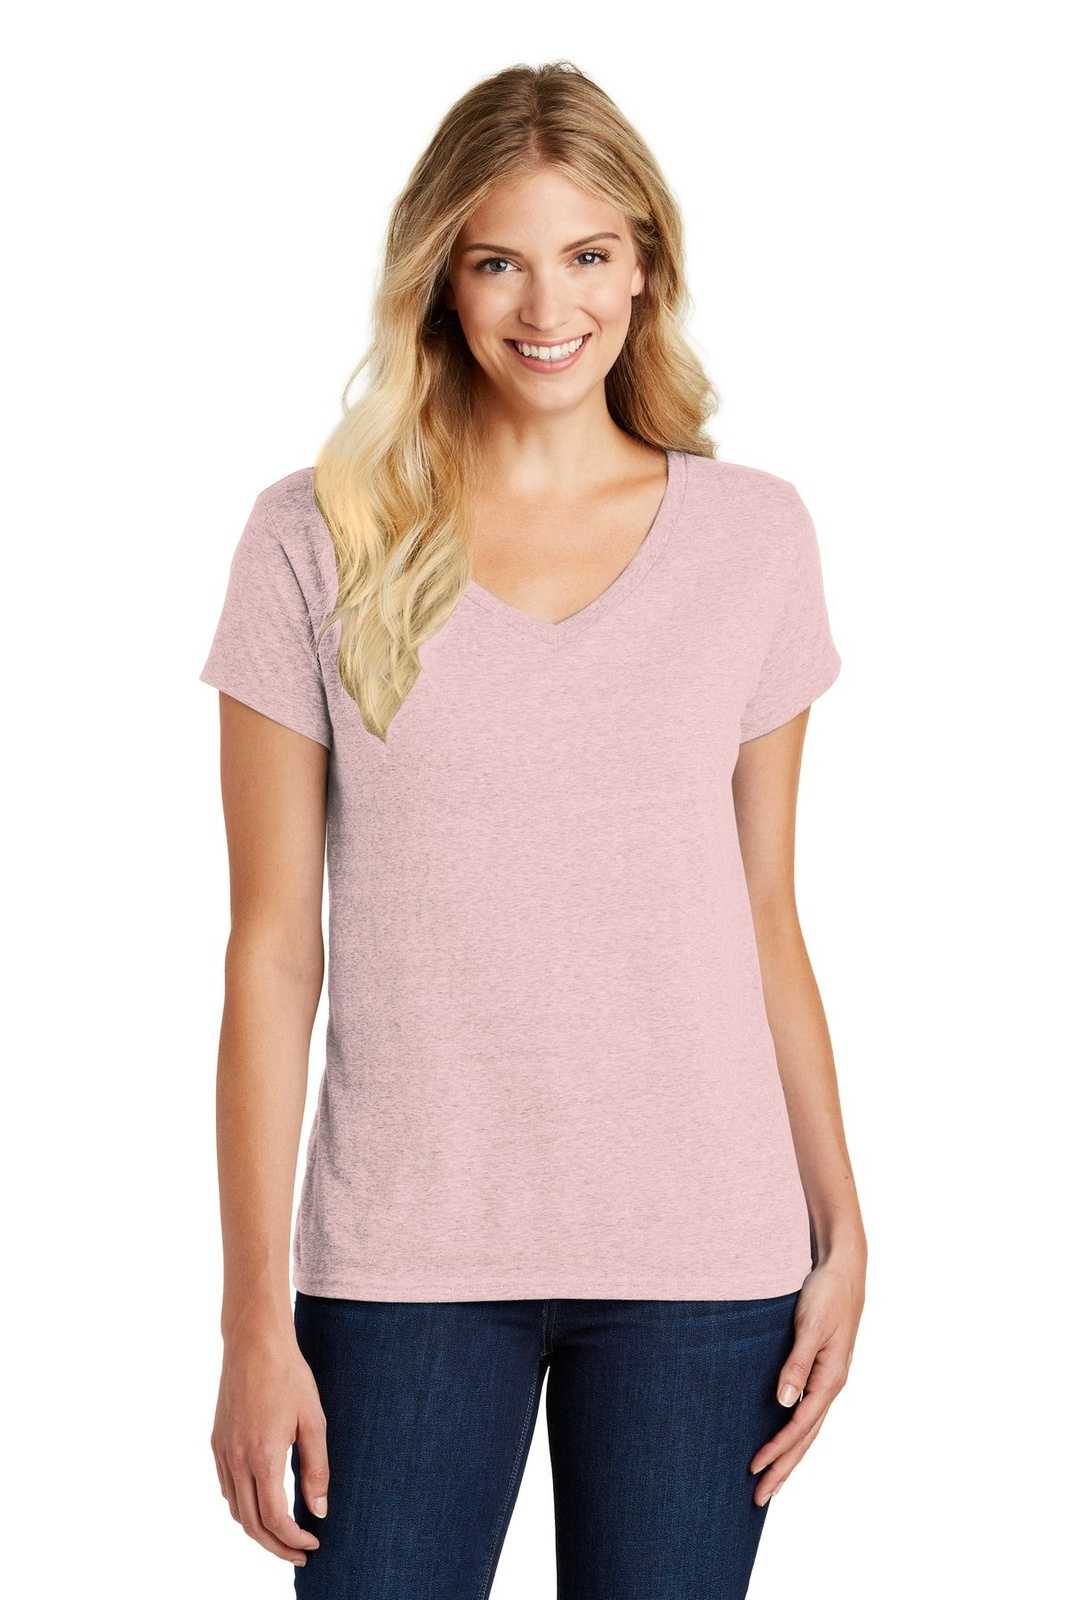 District DM1190L Women's Perfect Blend V-Neck Tee - Heathered Lavender - HIT a Double - 1